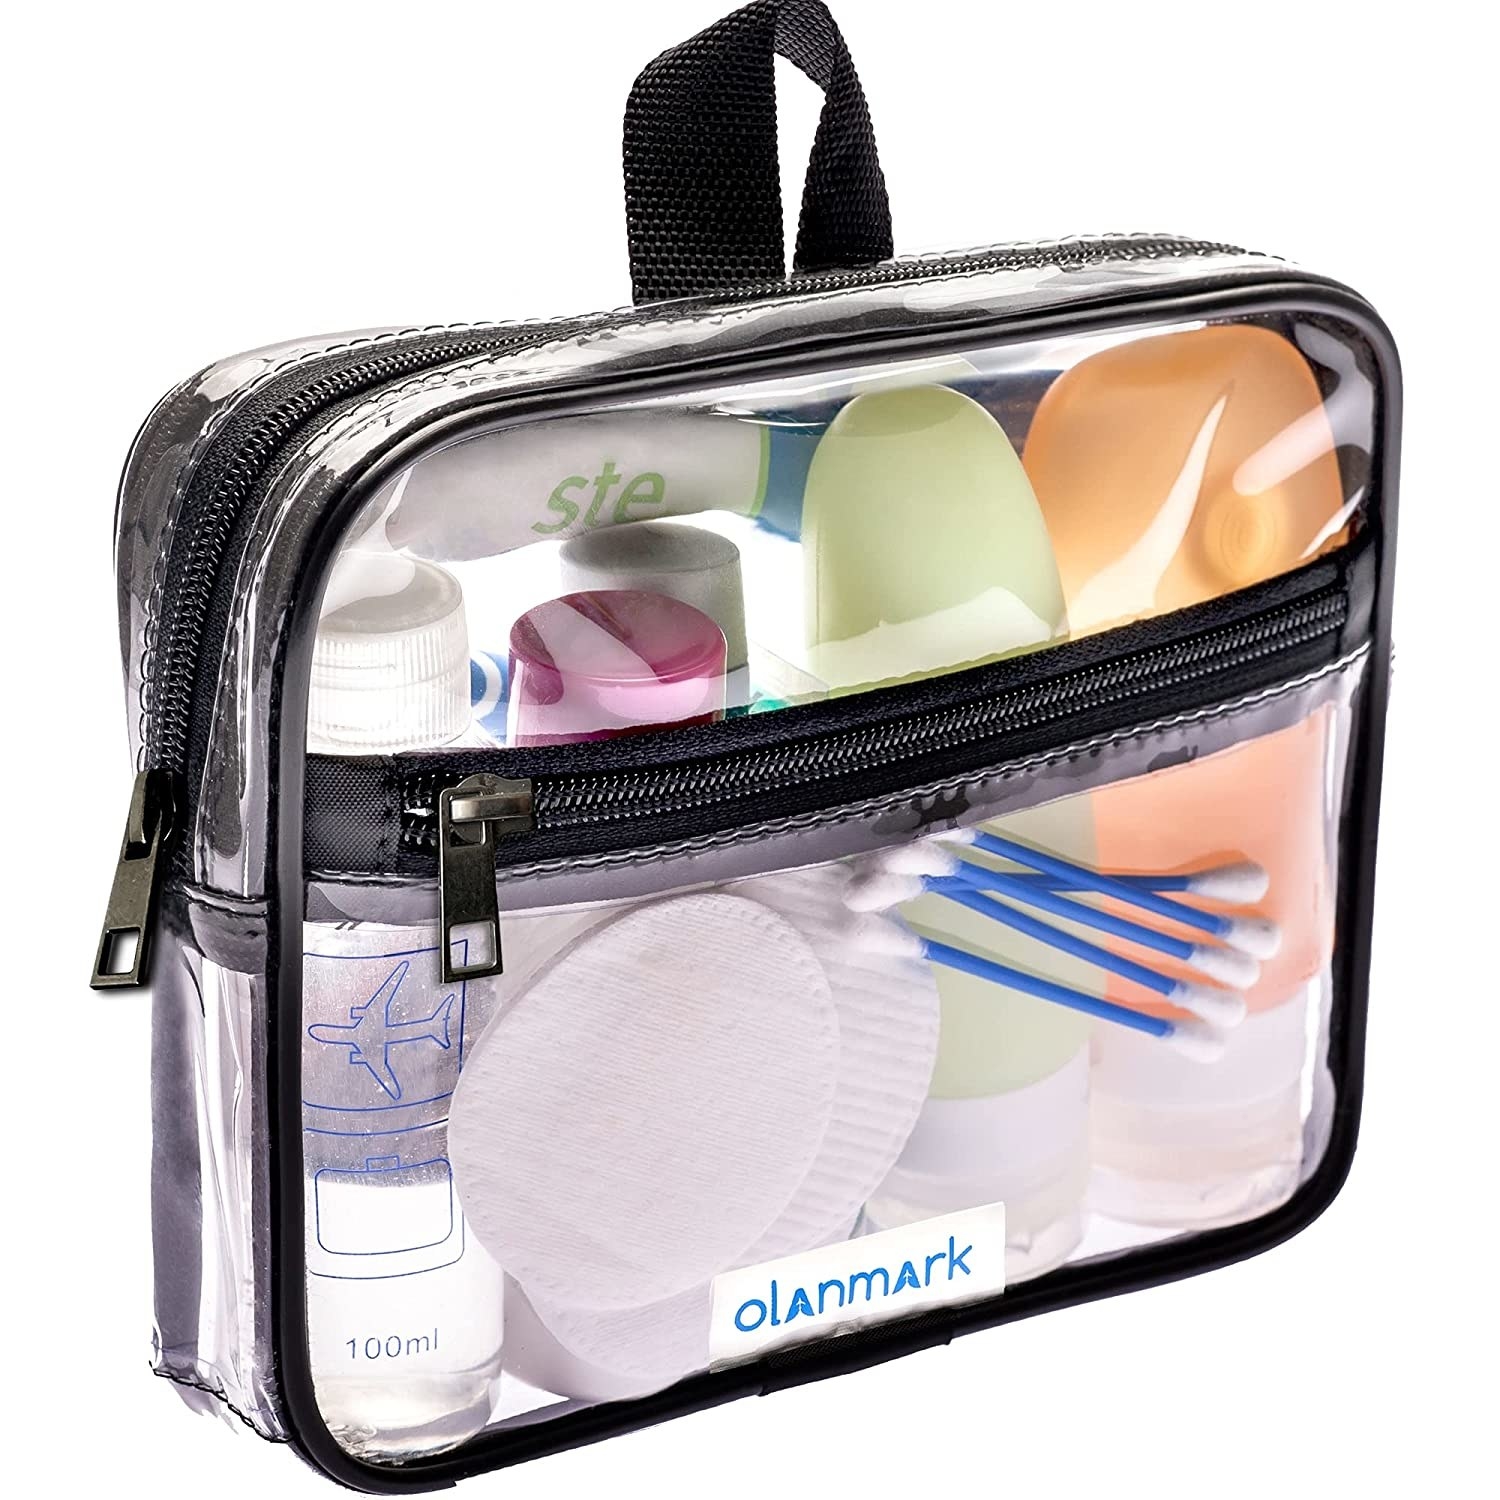 The toiletry bag with various items inside